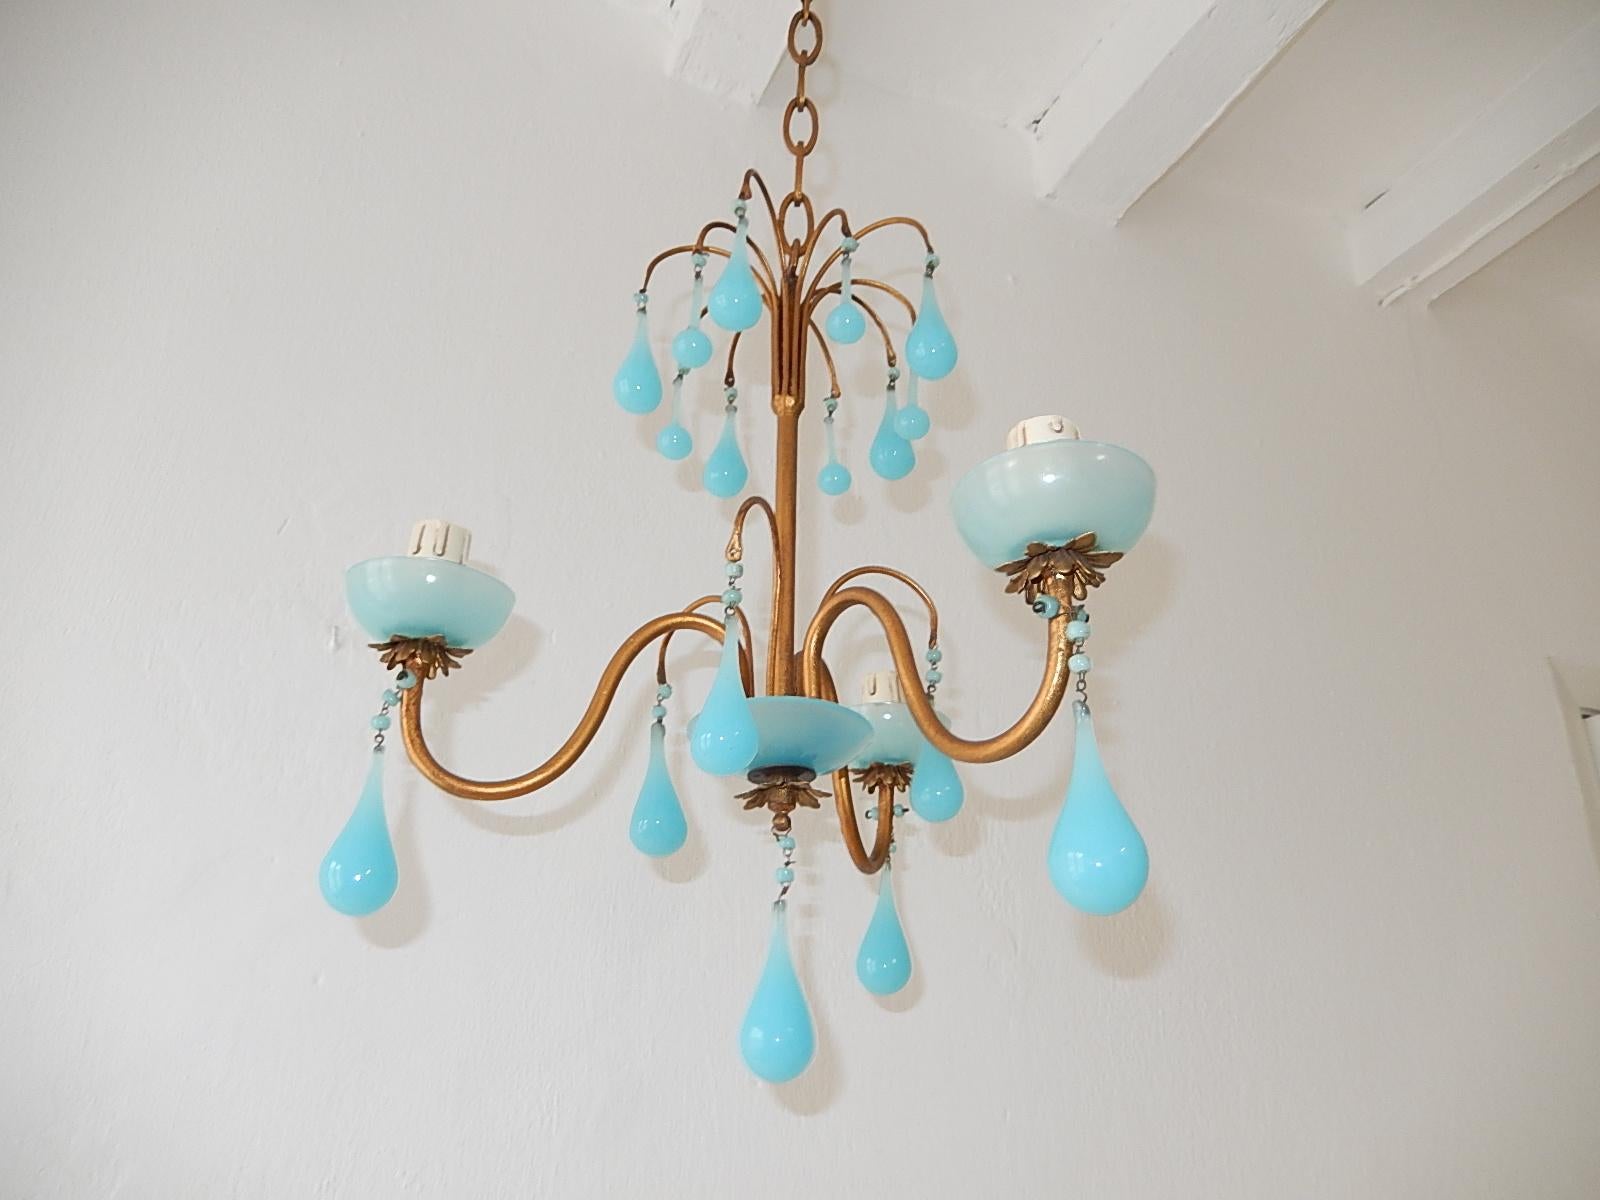 Housing 3-light sitting in blue opaline bobeches. Will be rewired with certified UL US sockets or appropriate sockets for other countries and ready to hang. Gilt metal. Murano blue opaline drops in two sizes and beads. Another blue bobeche on